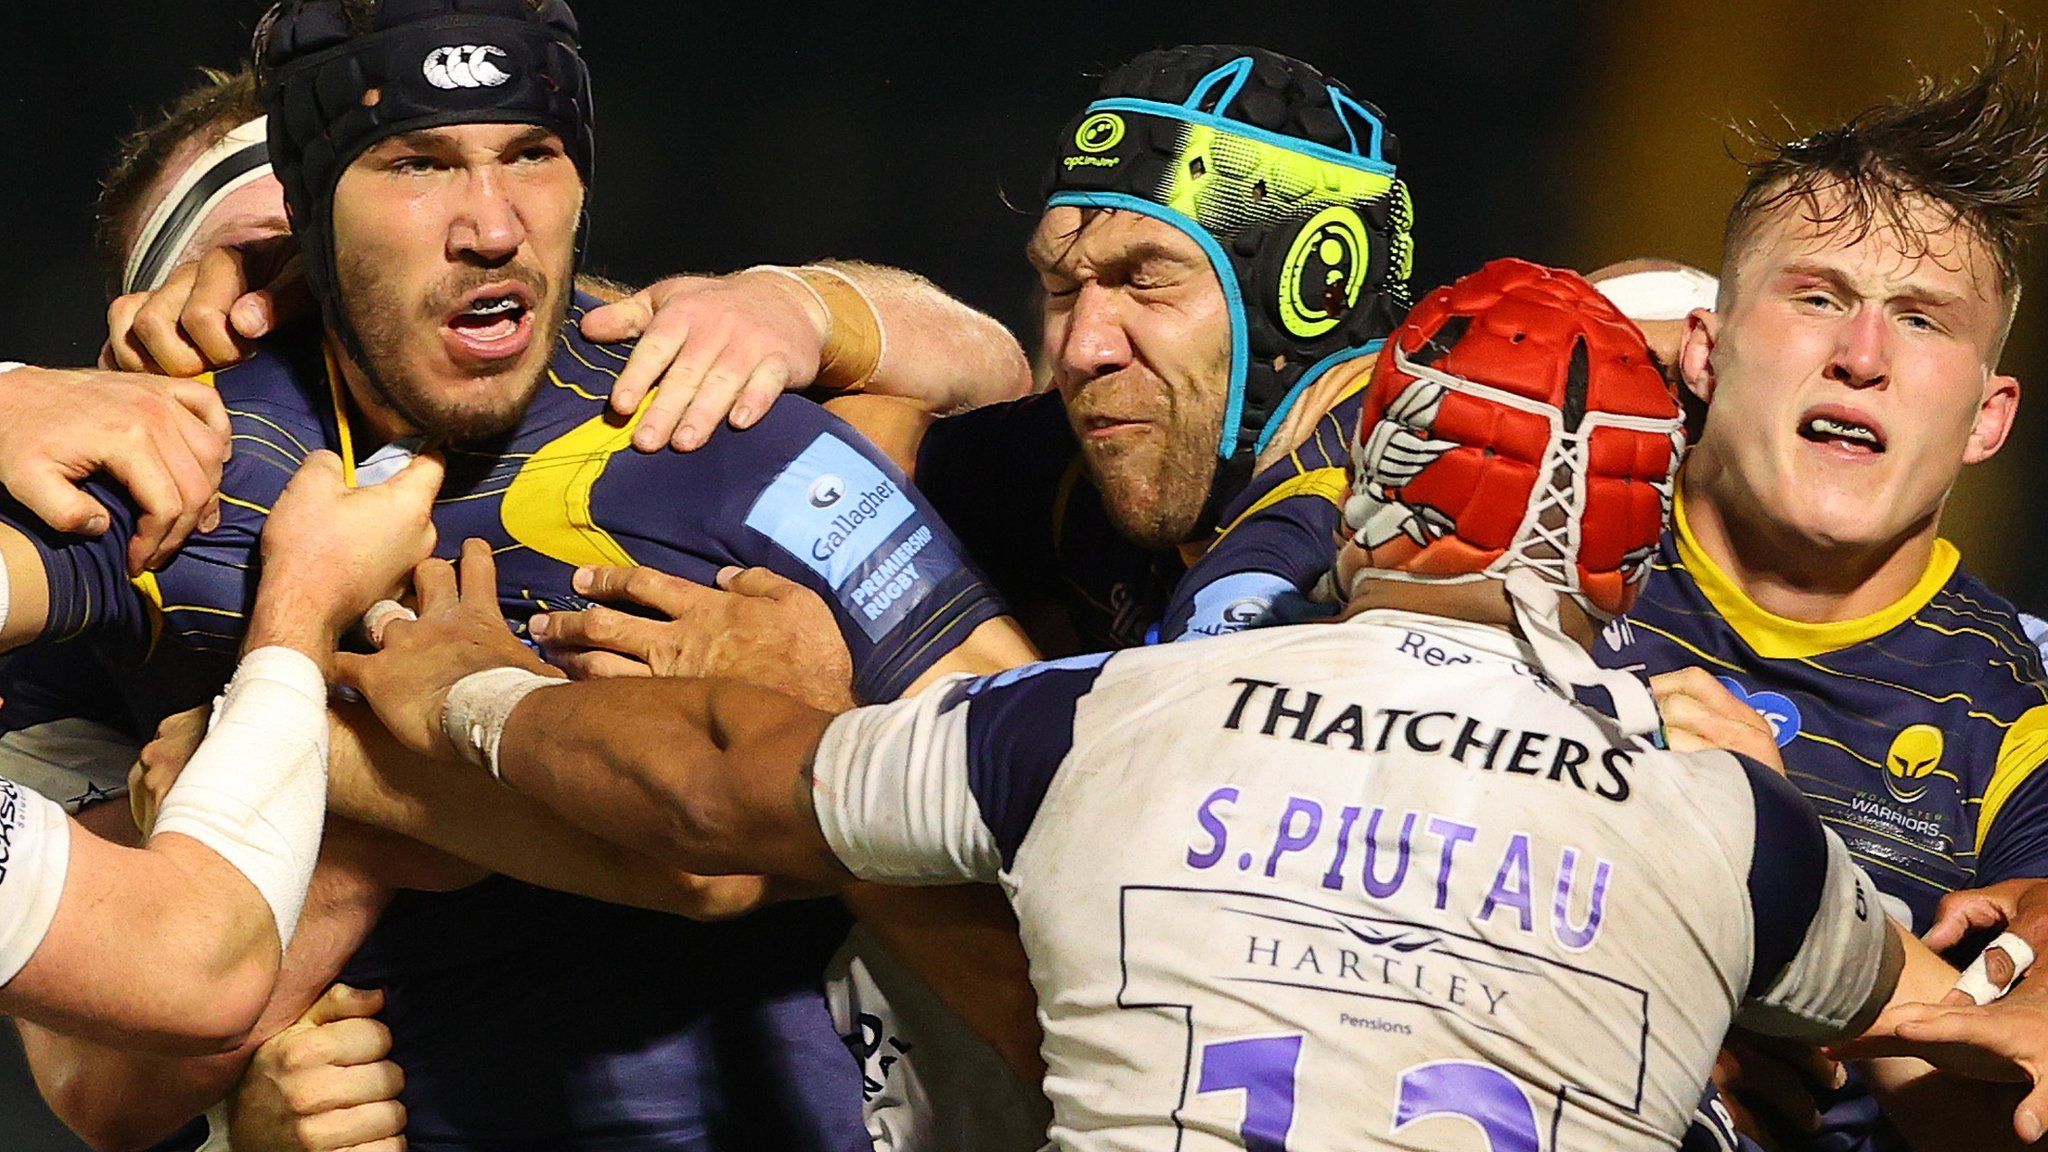 Siale Piutau was sent off in the late Sixways dust-up along with Andrew Kitchener (left), his brother Graham (centre) and Warriors club captain Ted Hill (right)